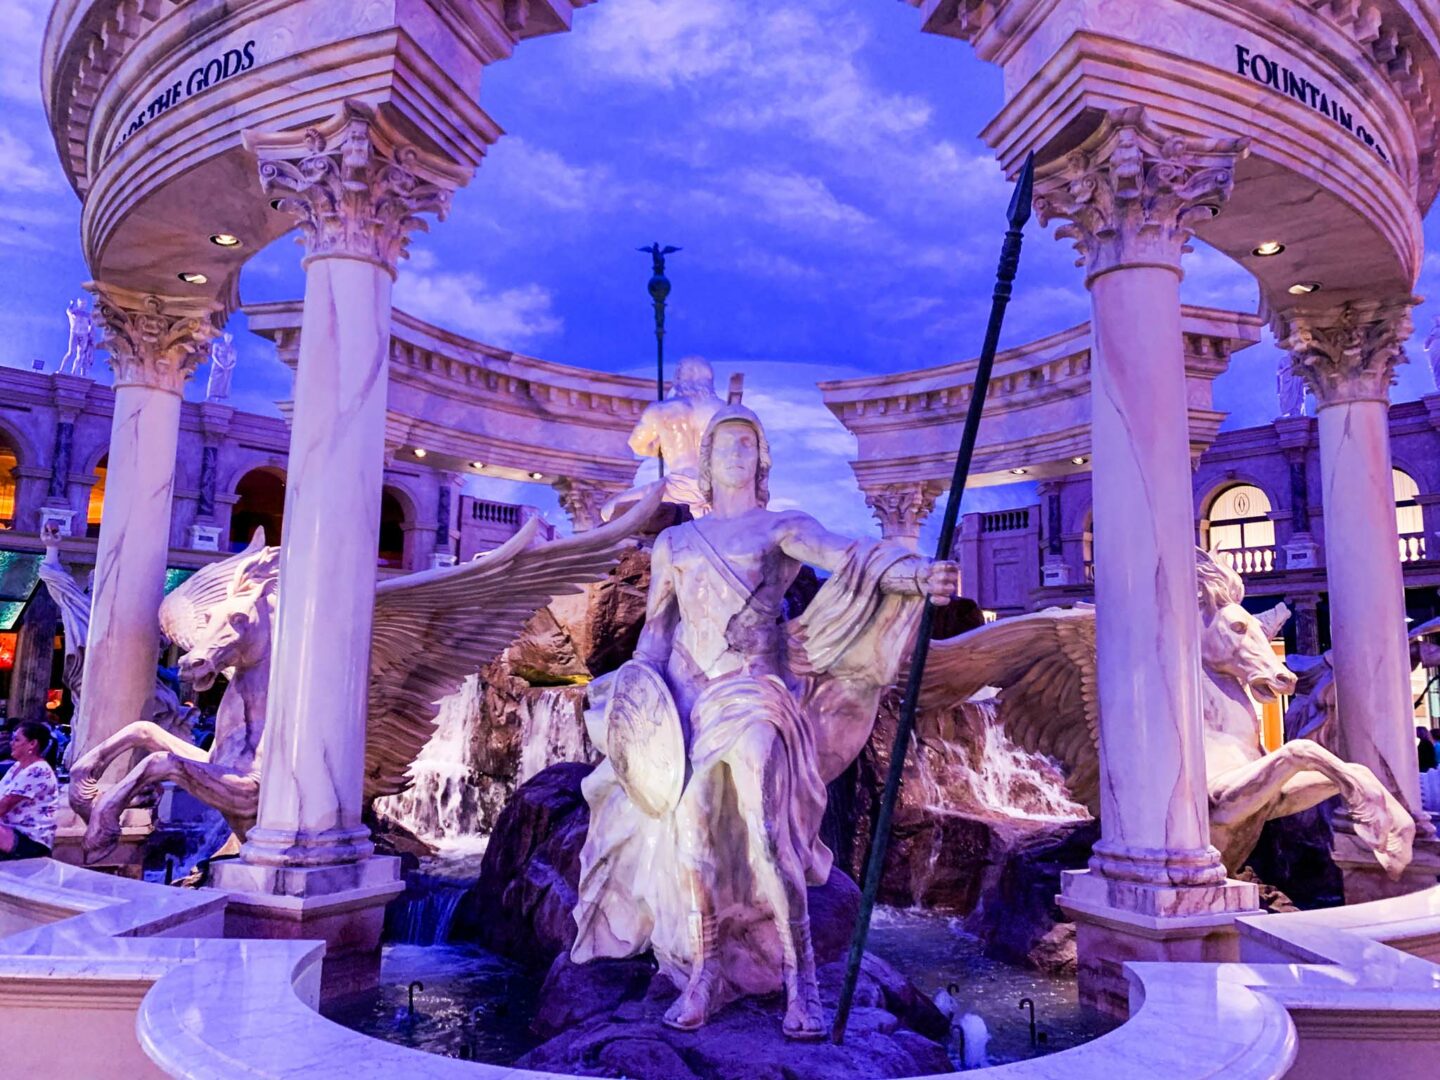 Inside the Forum Shops, the mall is designed to look like a roman ruin. 